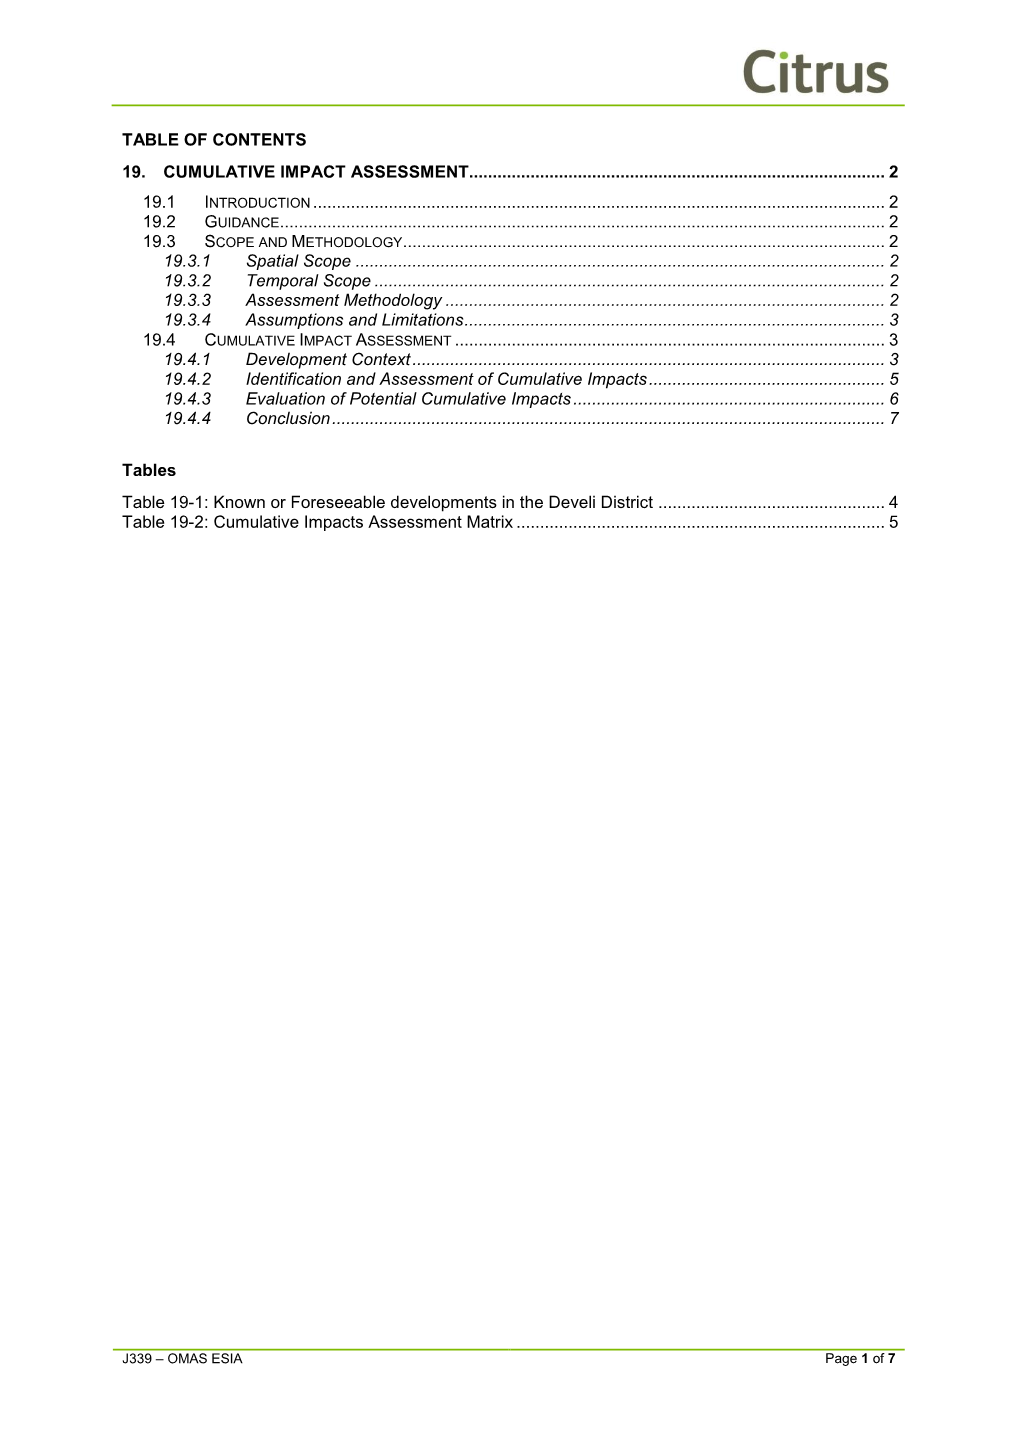 Table of Contents 19. Cumulative Impact Assessment